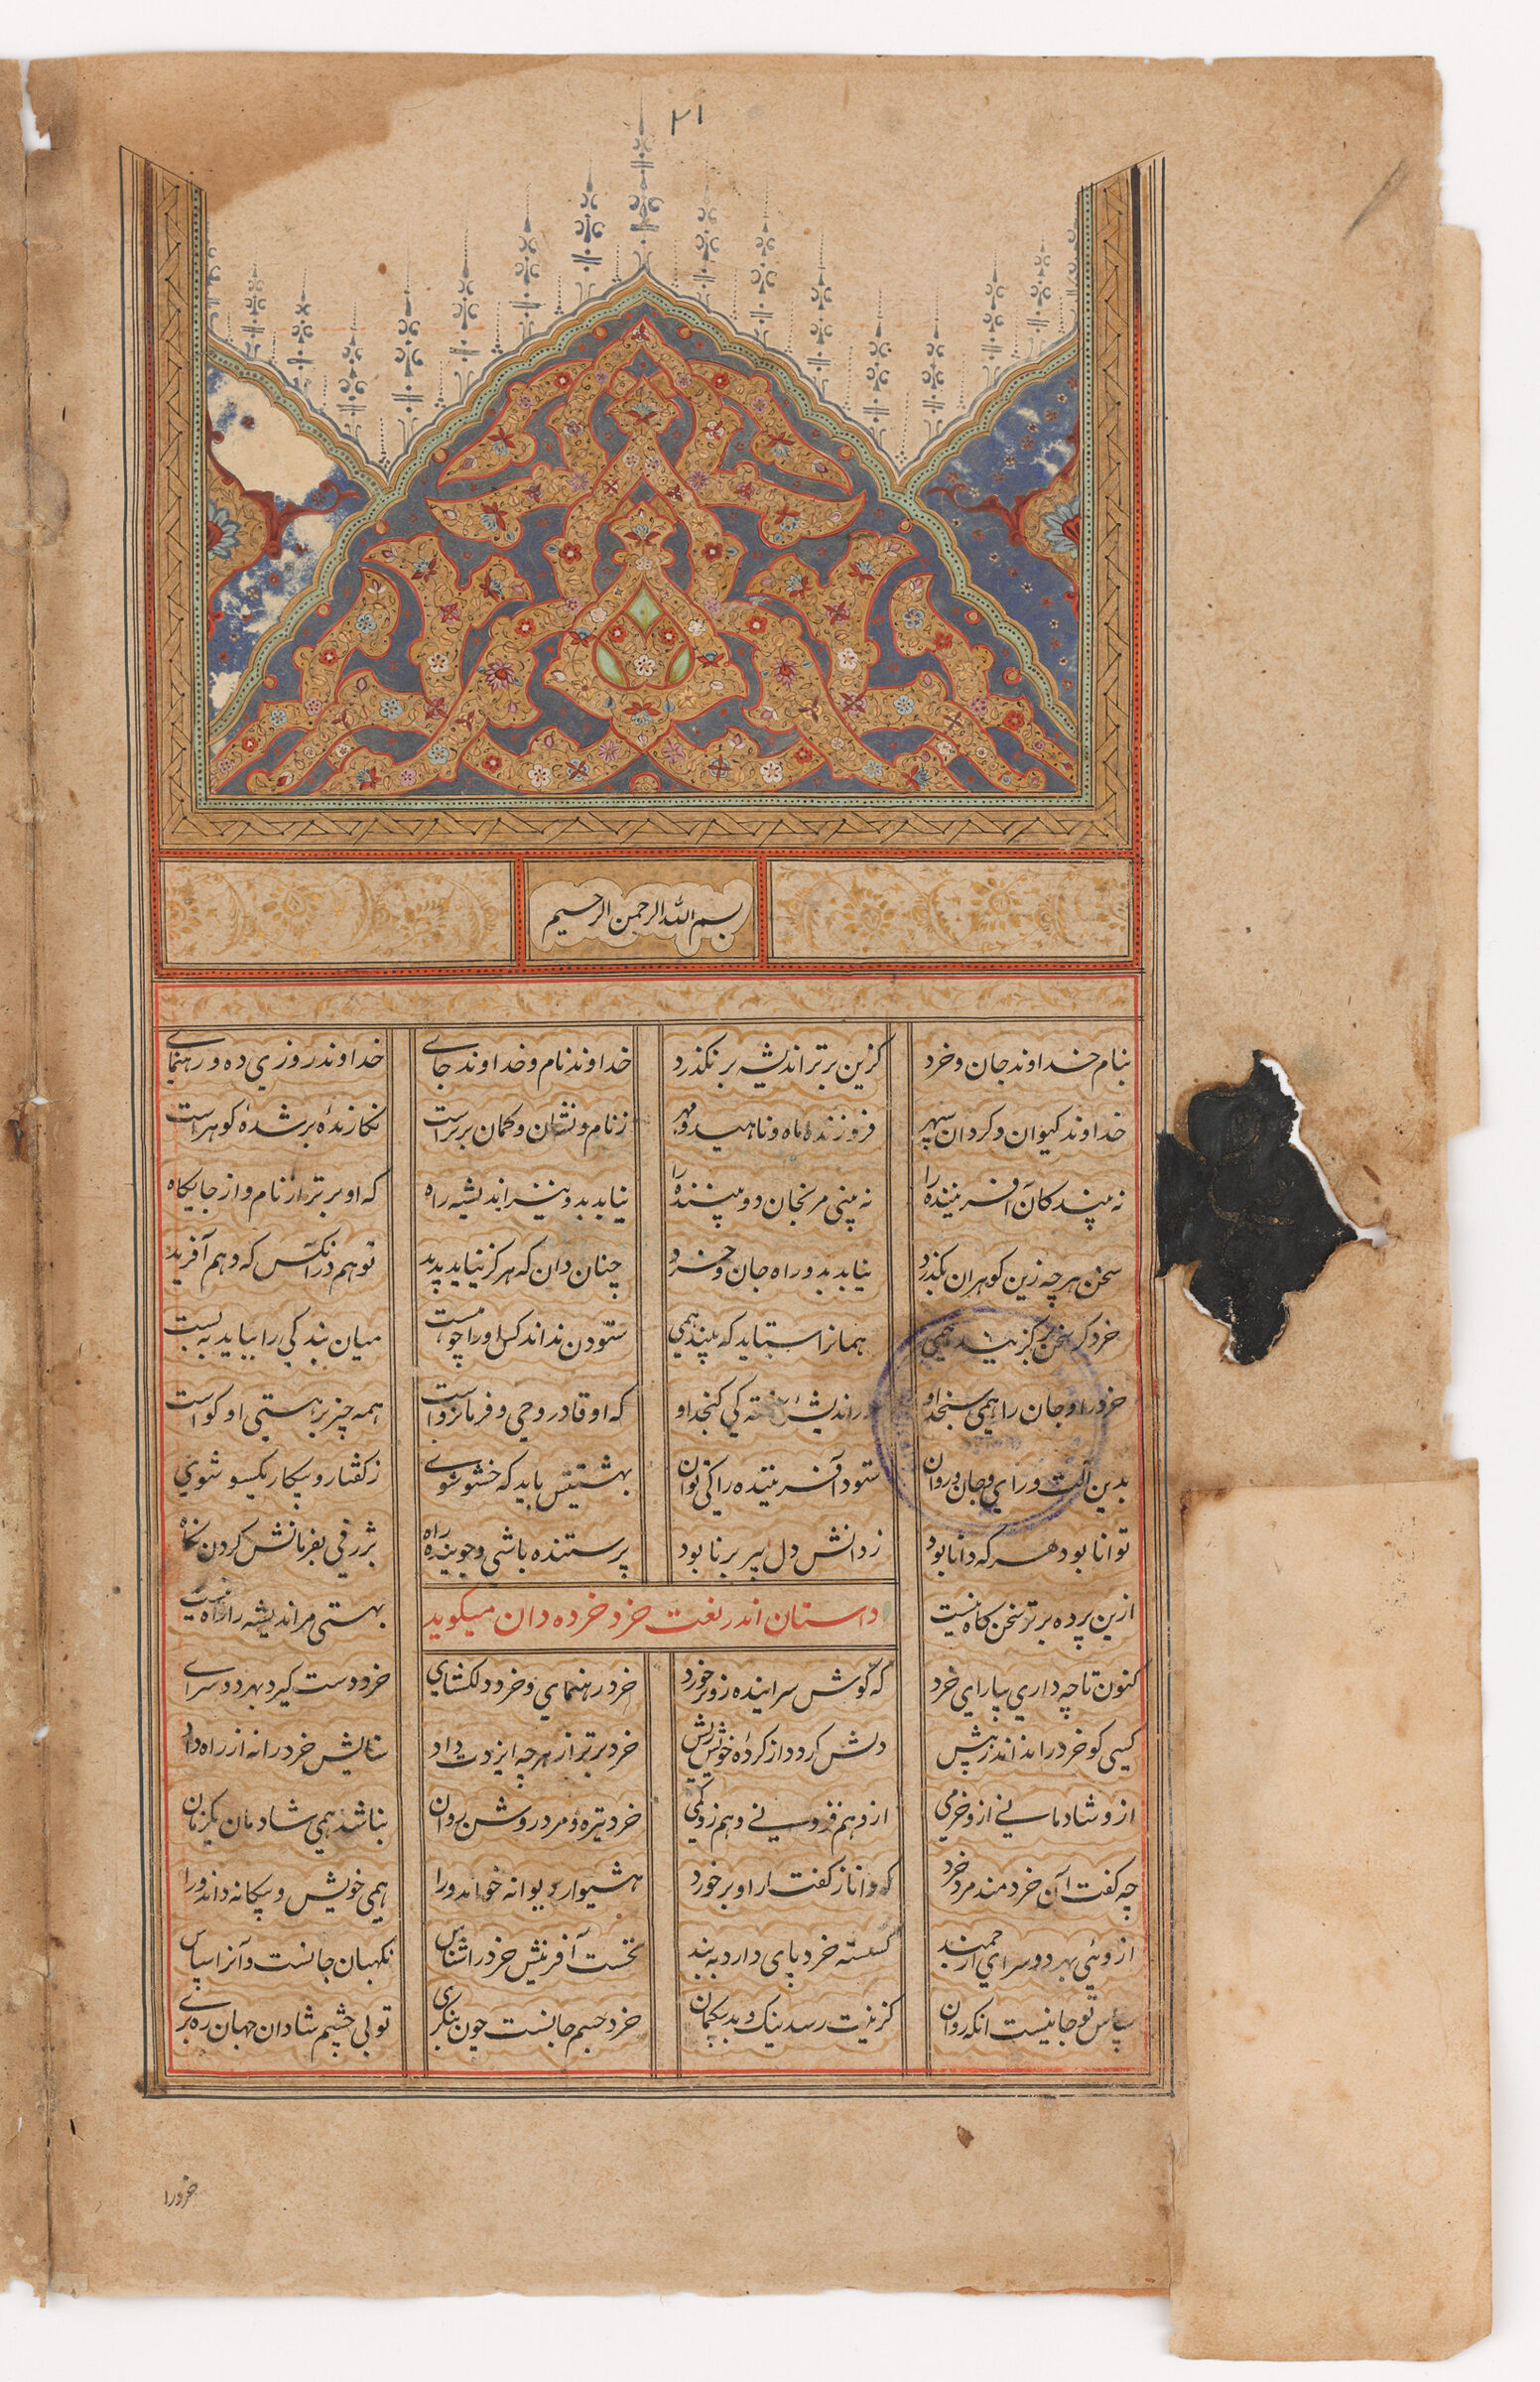 Illustrated Manuscript Of The Shahnama By Firdawsi With Interpolations From The Garshaspnama By Tusi And The Barzunama